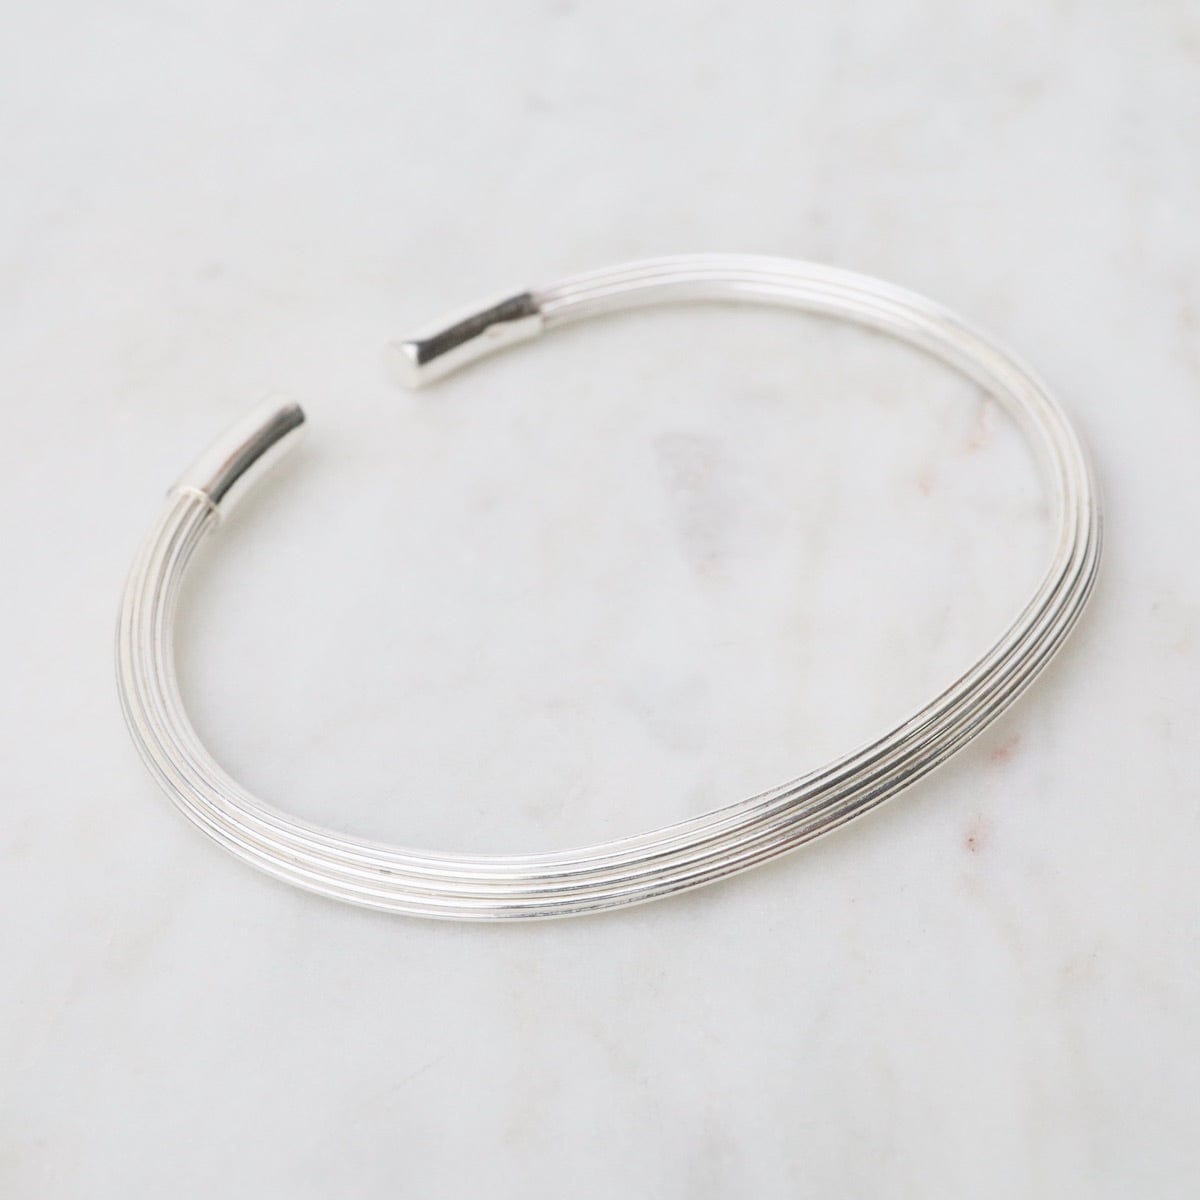 BRC Elephant Hair Inspired Cuff - Shiny Sterling Silver - 15 Lines